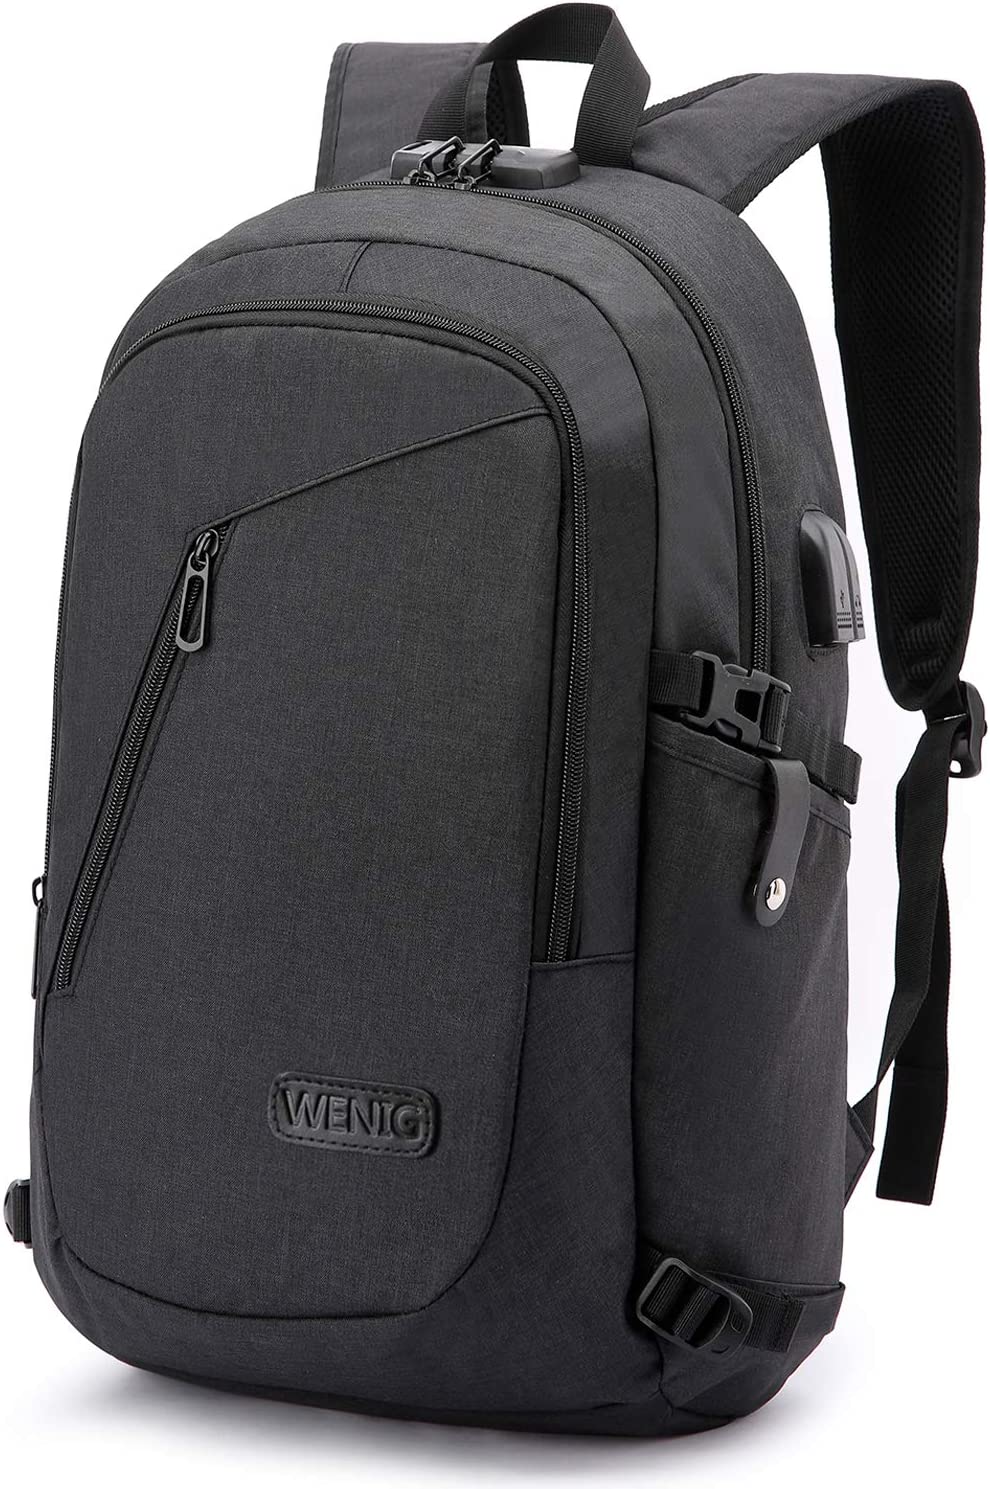 Laptop Backpack,Anti Theft Business Travel Backpack [...]